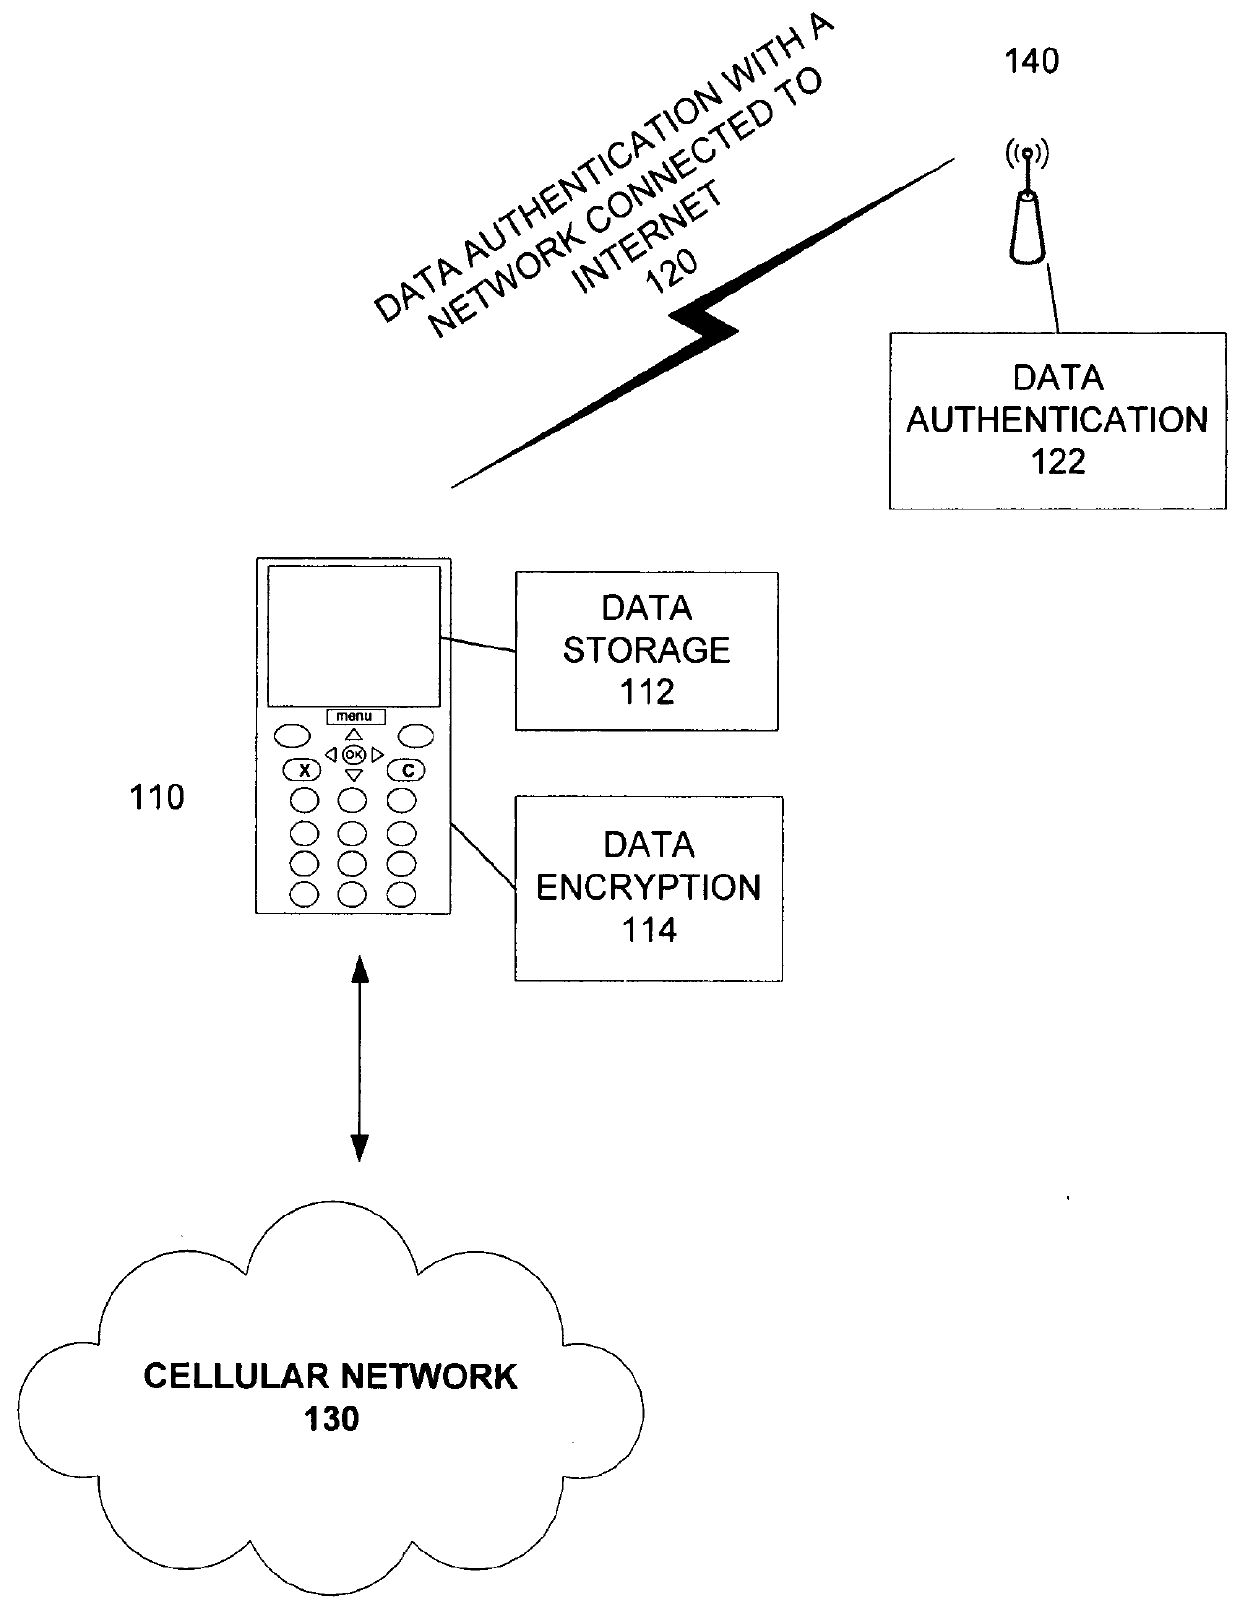 Automatic detection of required network key type